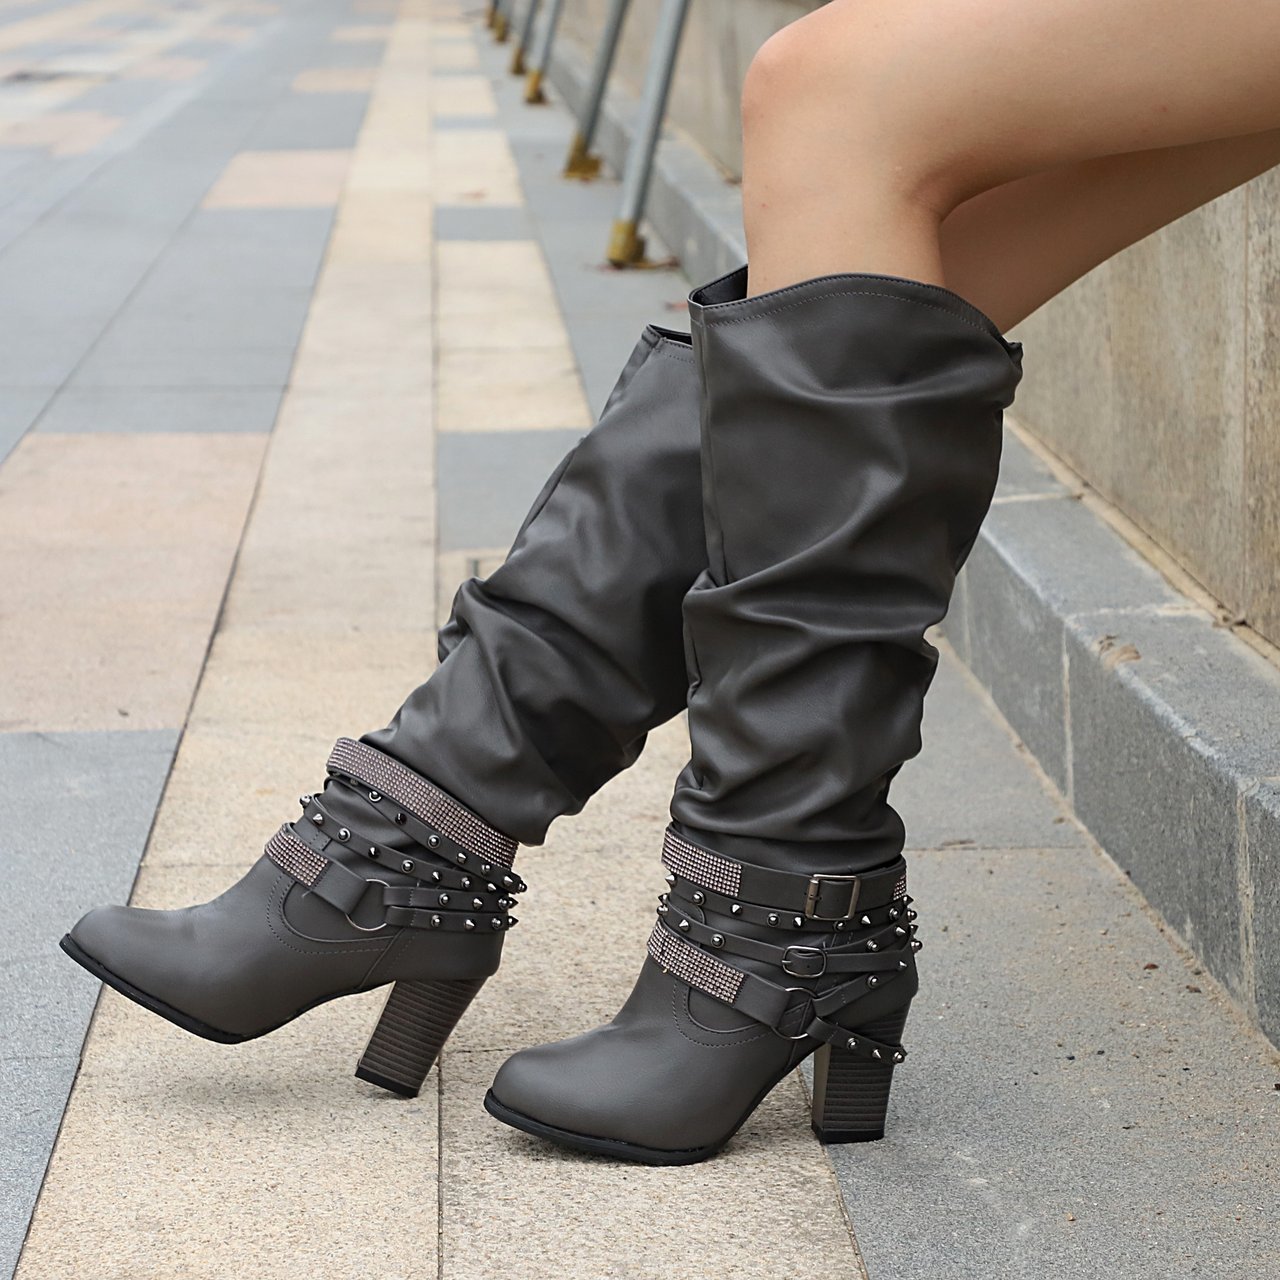 High heeled and high heeled Knight boots - CJdropshipping